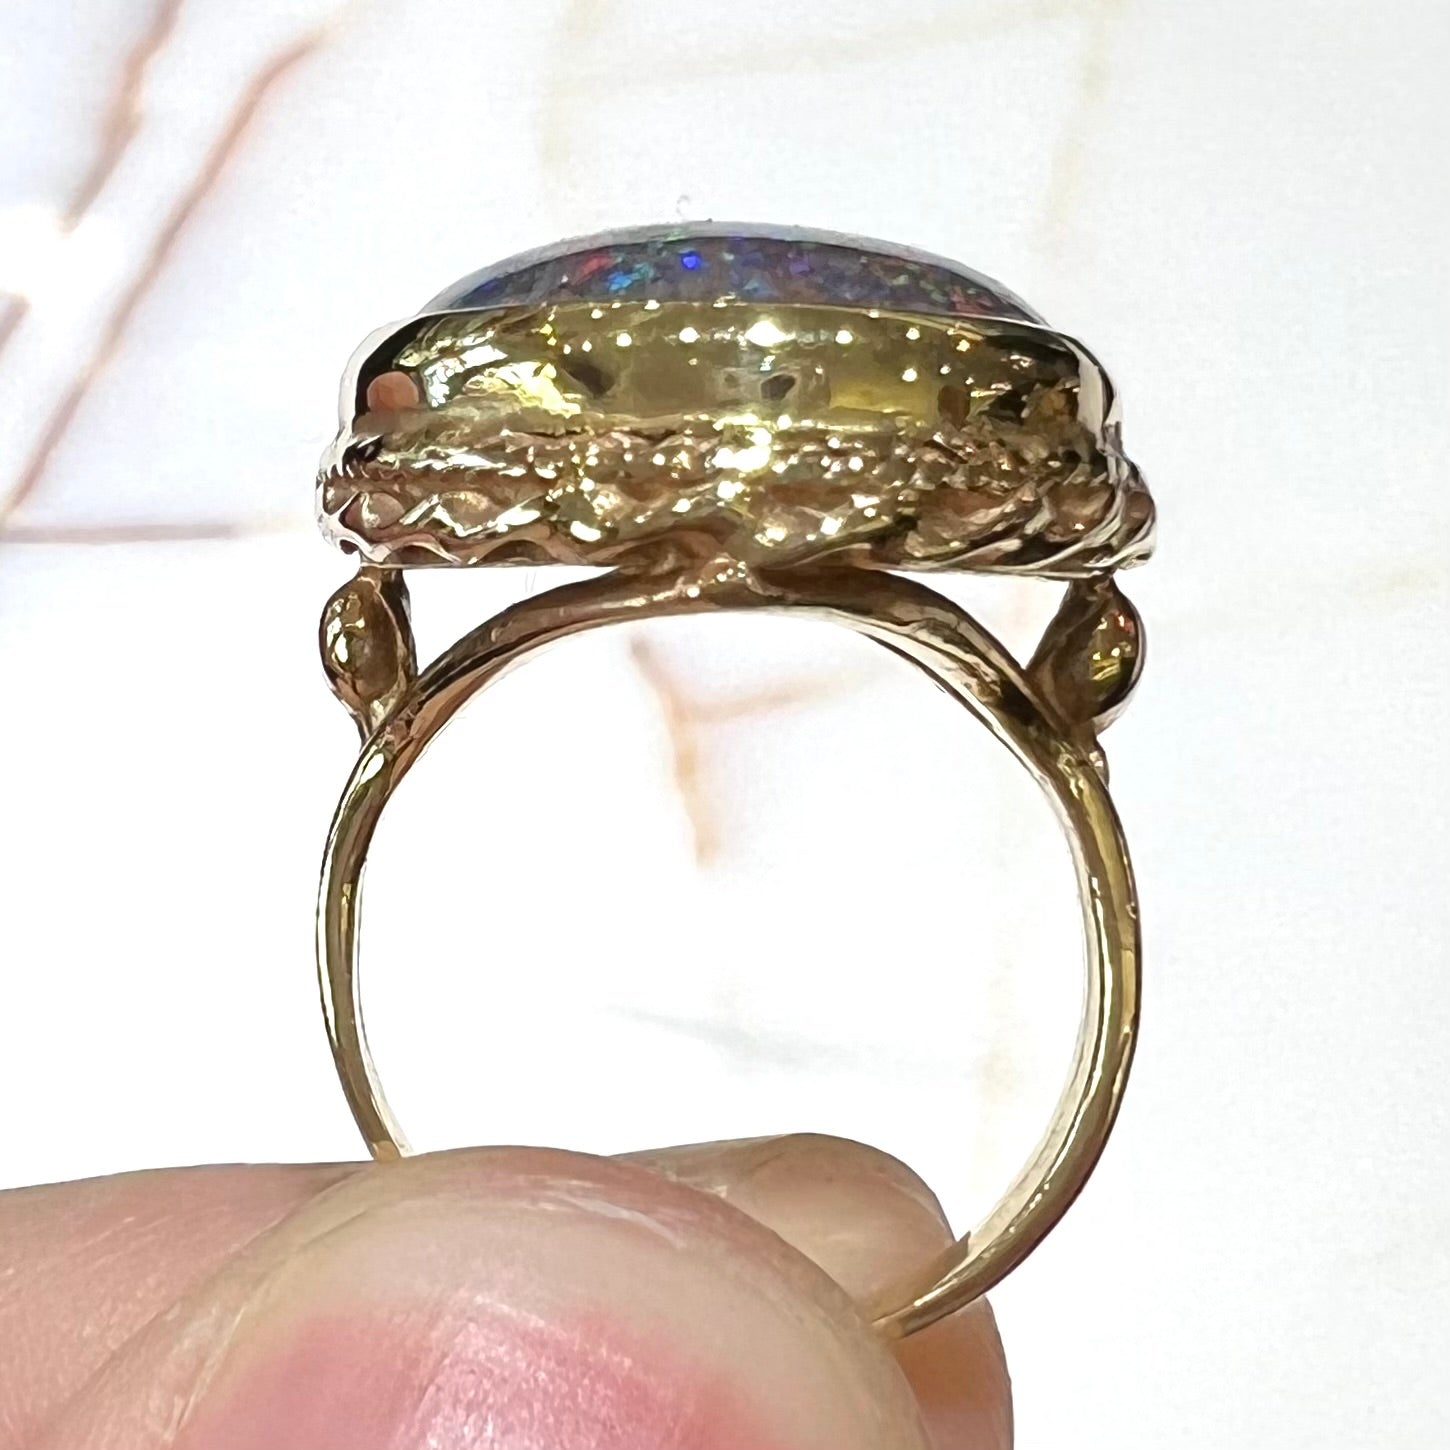 A bright black Andamooka opal that displays a pinfire pattern set in a vintage-style yellow gold bezel ring.